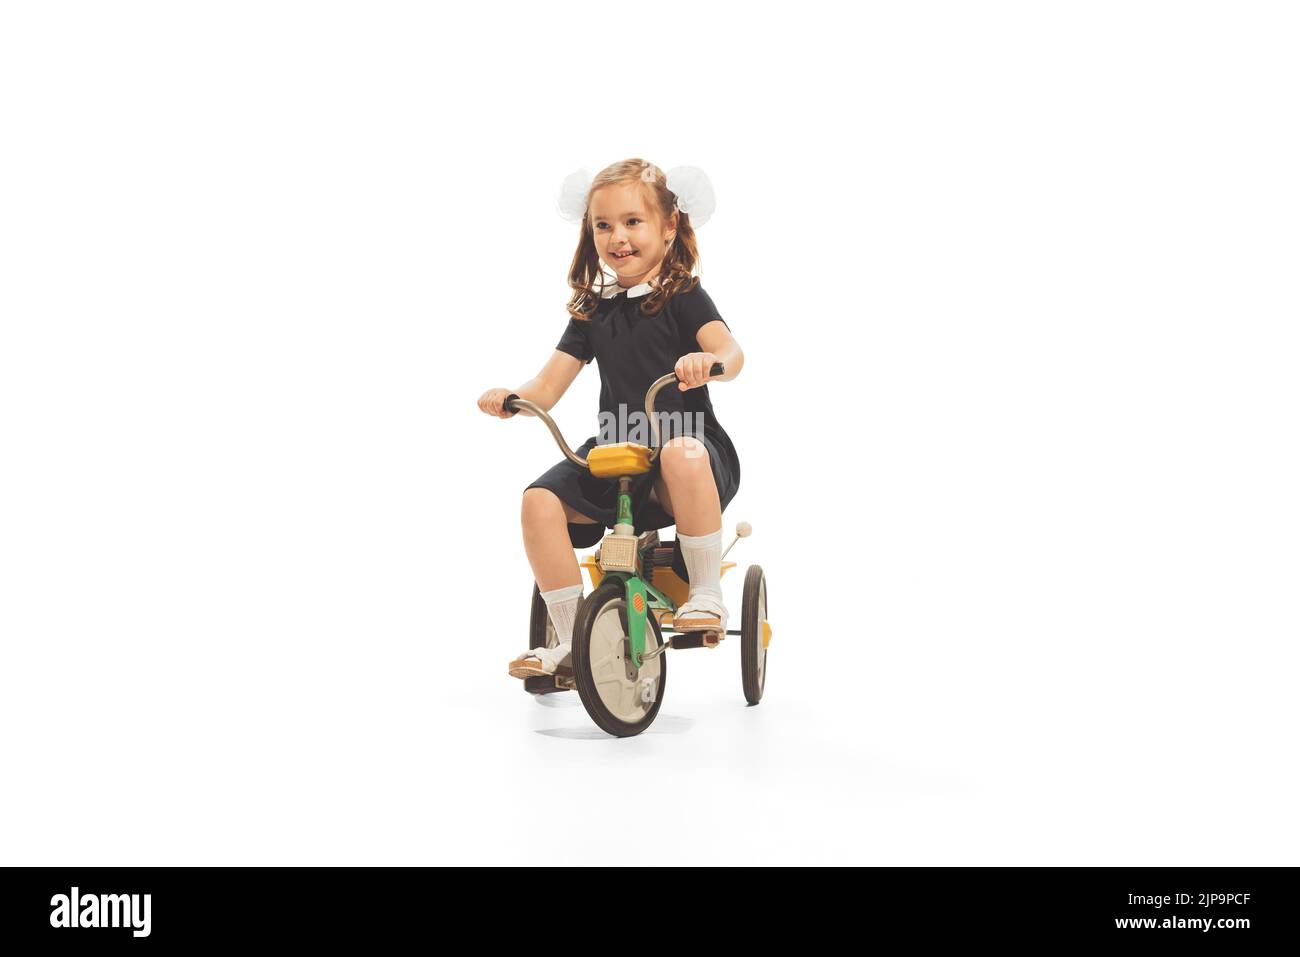 Portrait of child, girl in stylish retro dress playing, having fun, riding small bike isolated over white background Stock Photo